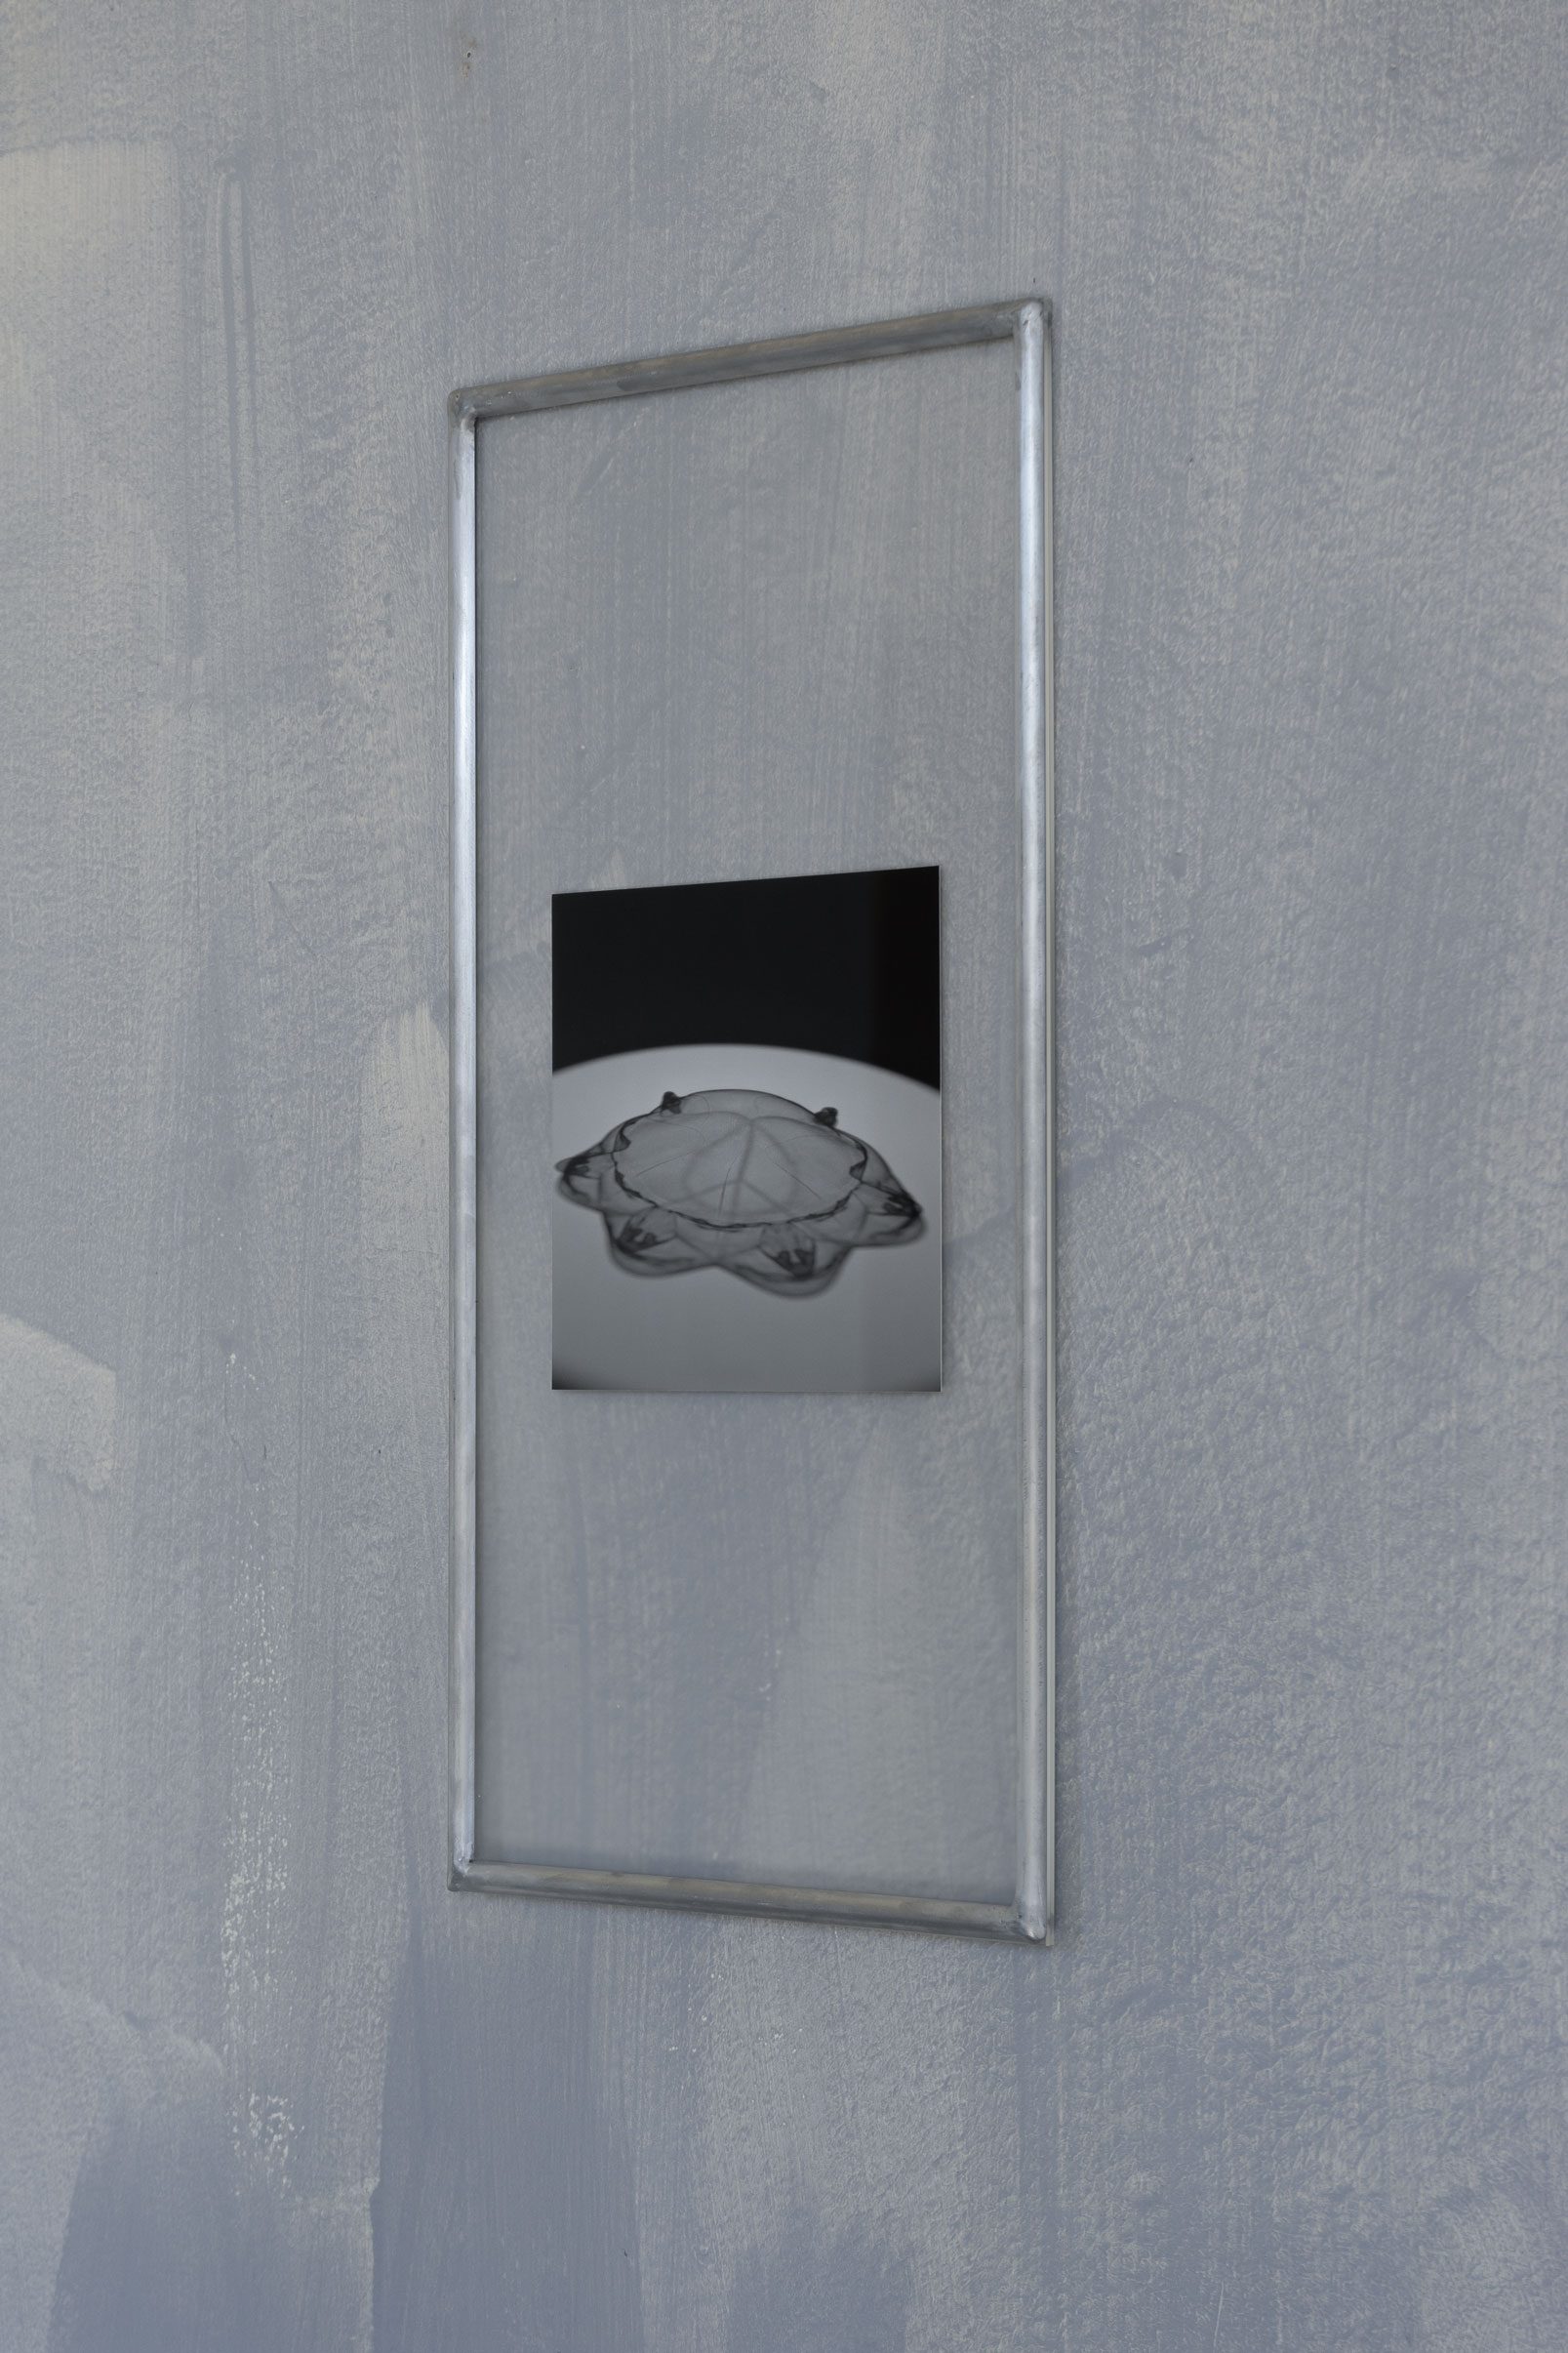 Blinkers for octagon, 2022 (silver gelatine exposure on baryta paper in plexiglass and aluminium)